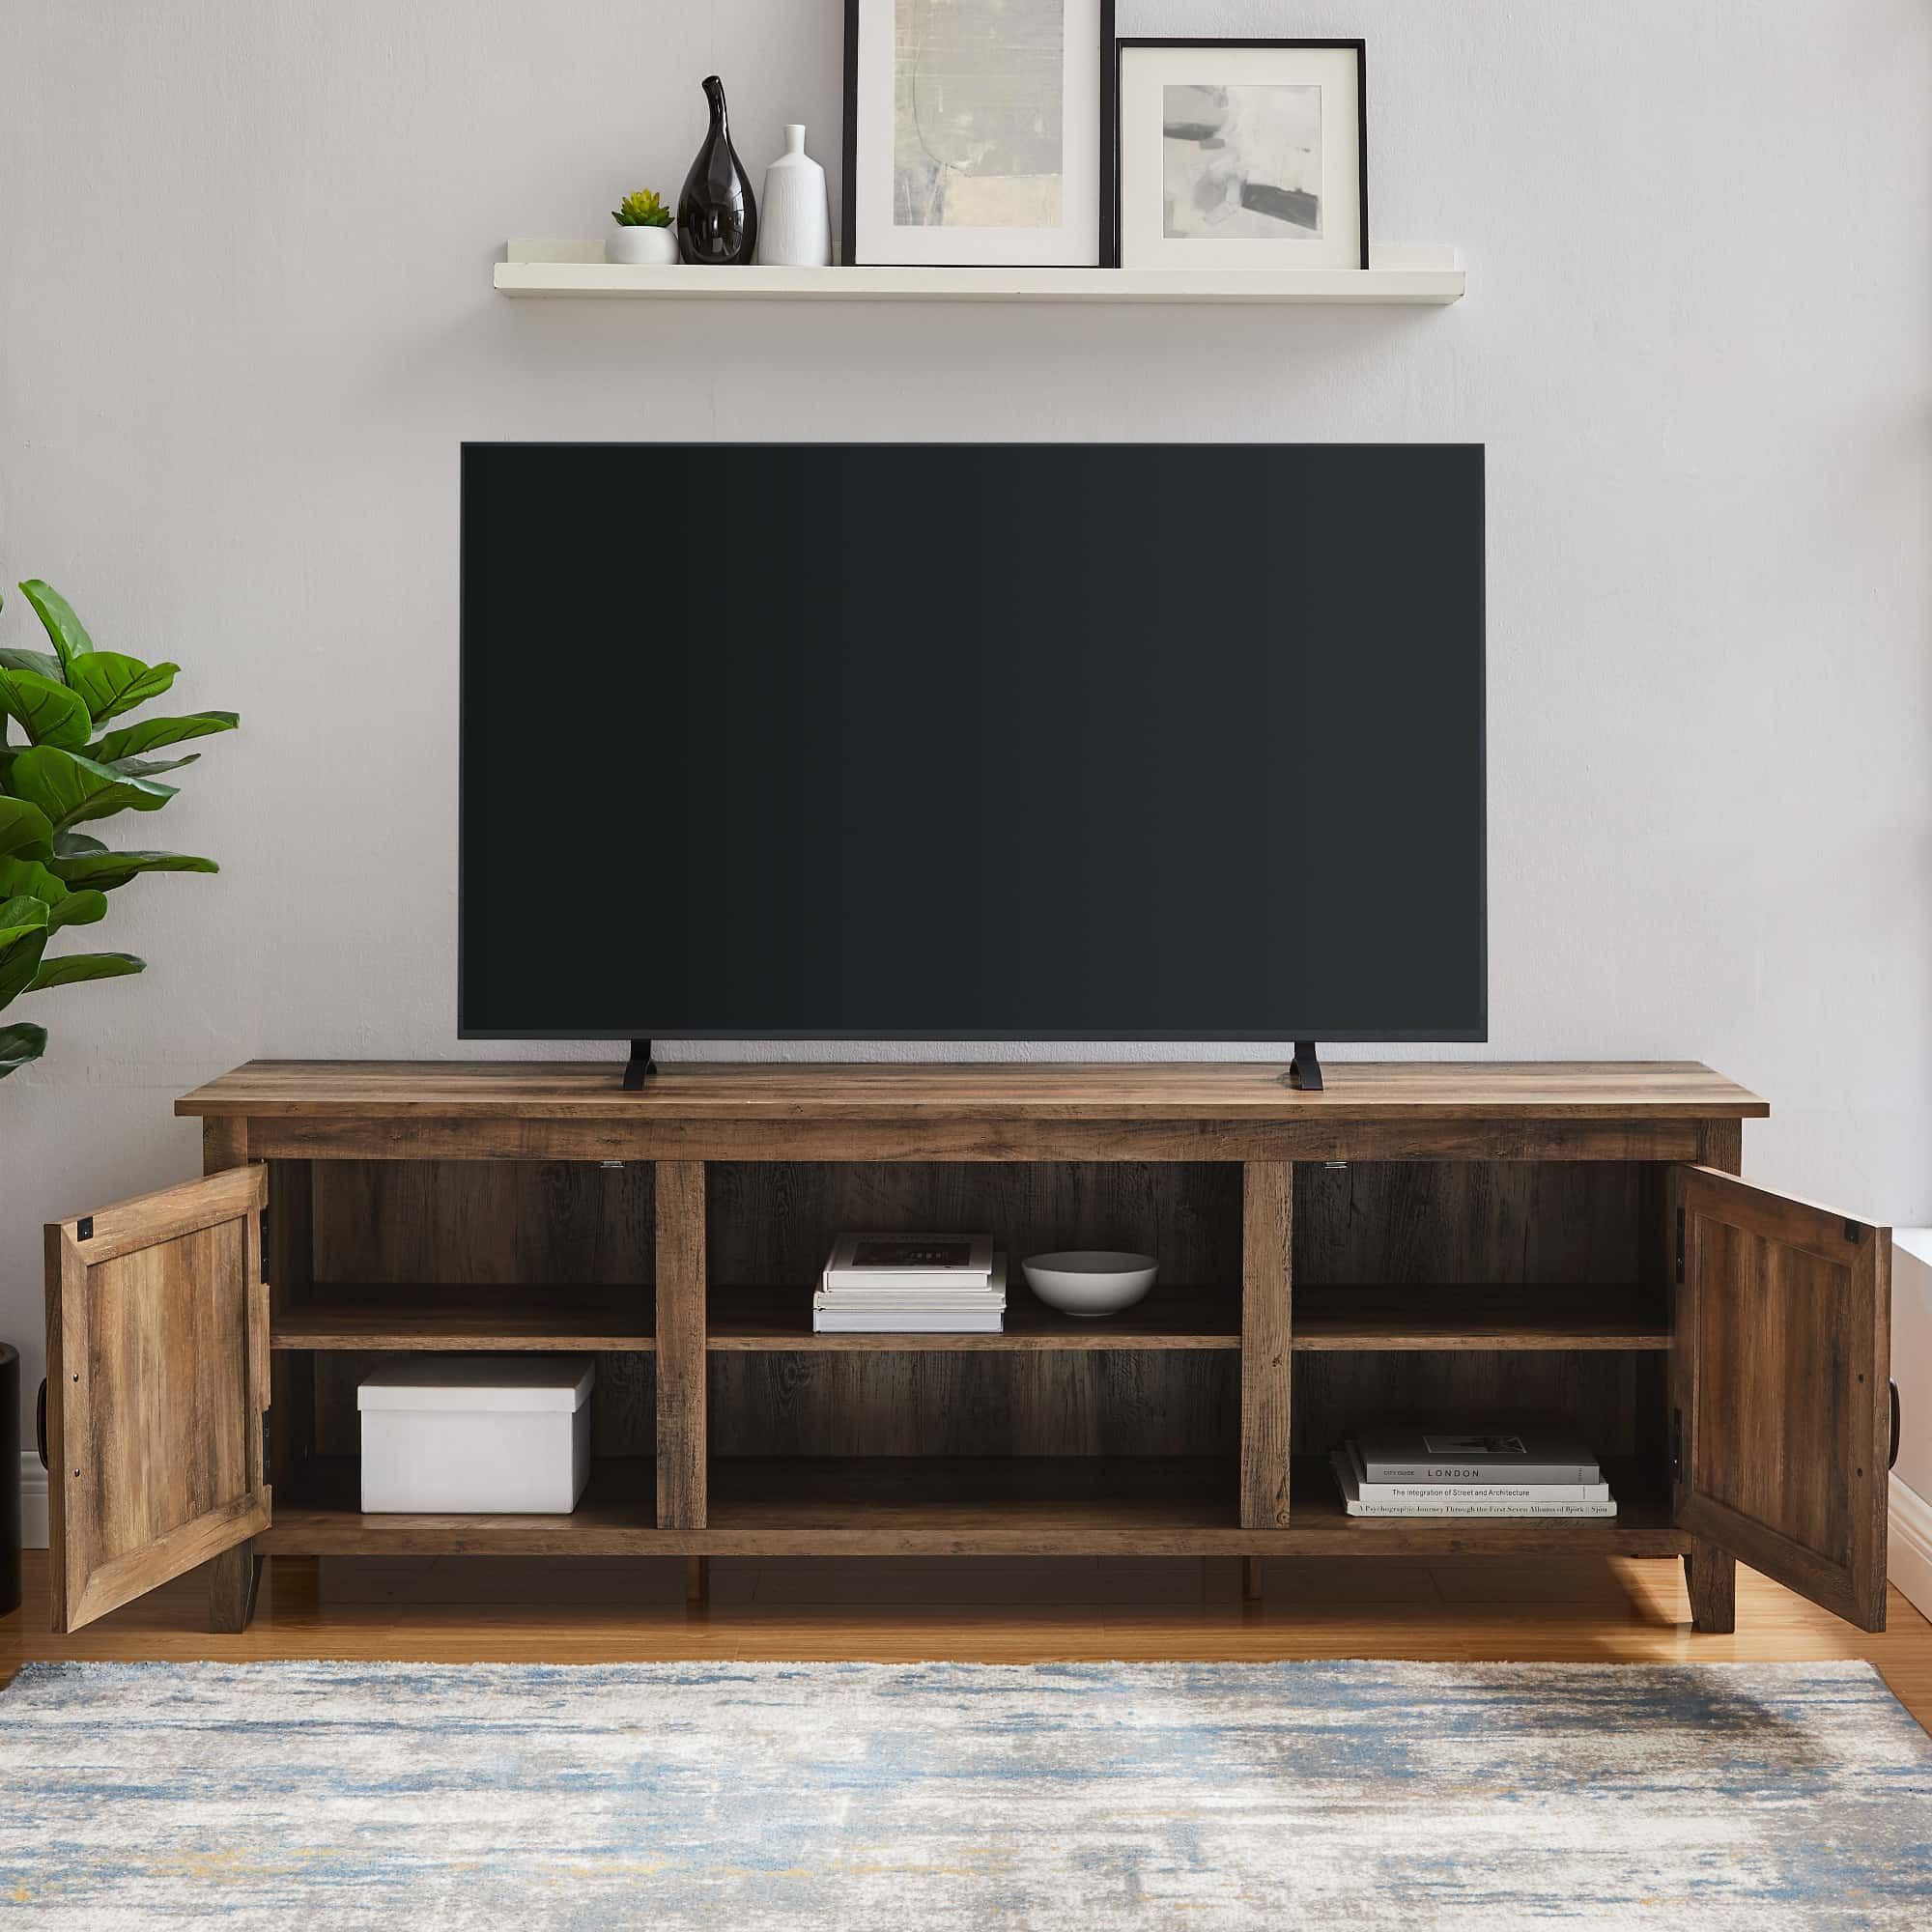 70 Inch Modern Farmhouse Wood Tv Stand – Rustic Oakwalker Edison Pertaining To Farmhouse Tv Stands For 70 Inch Tv (View 3 of 20)